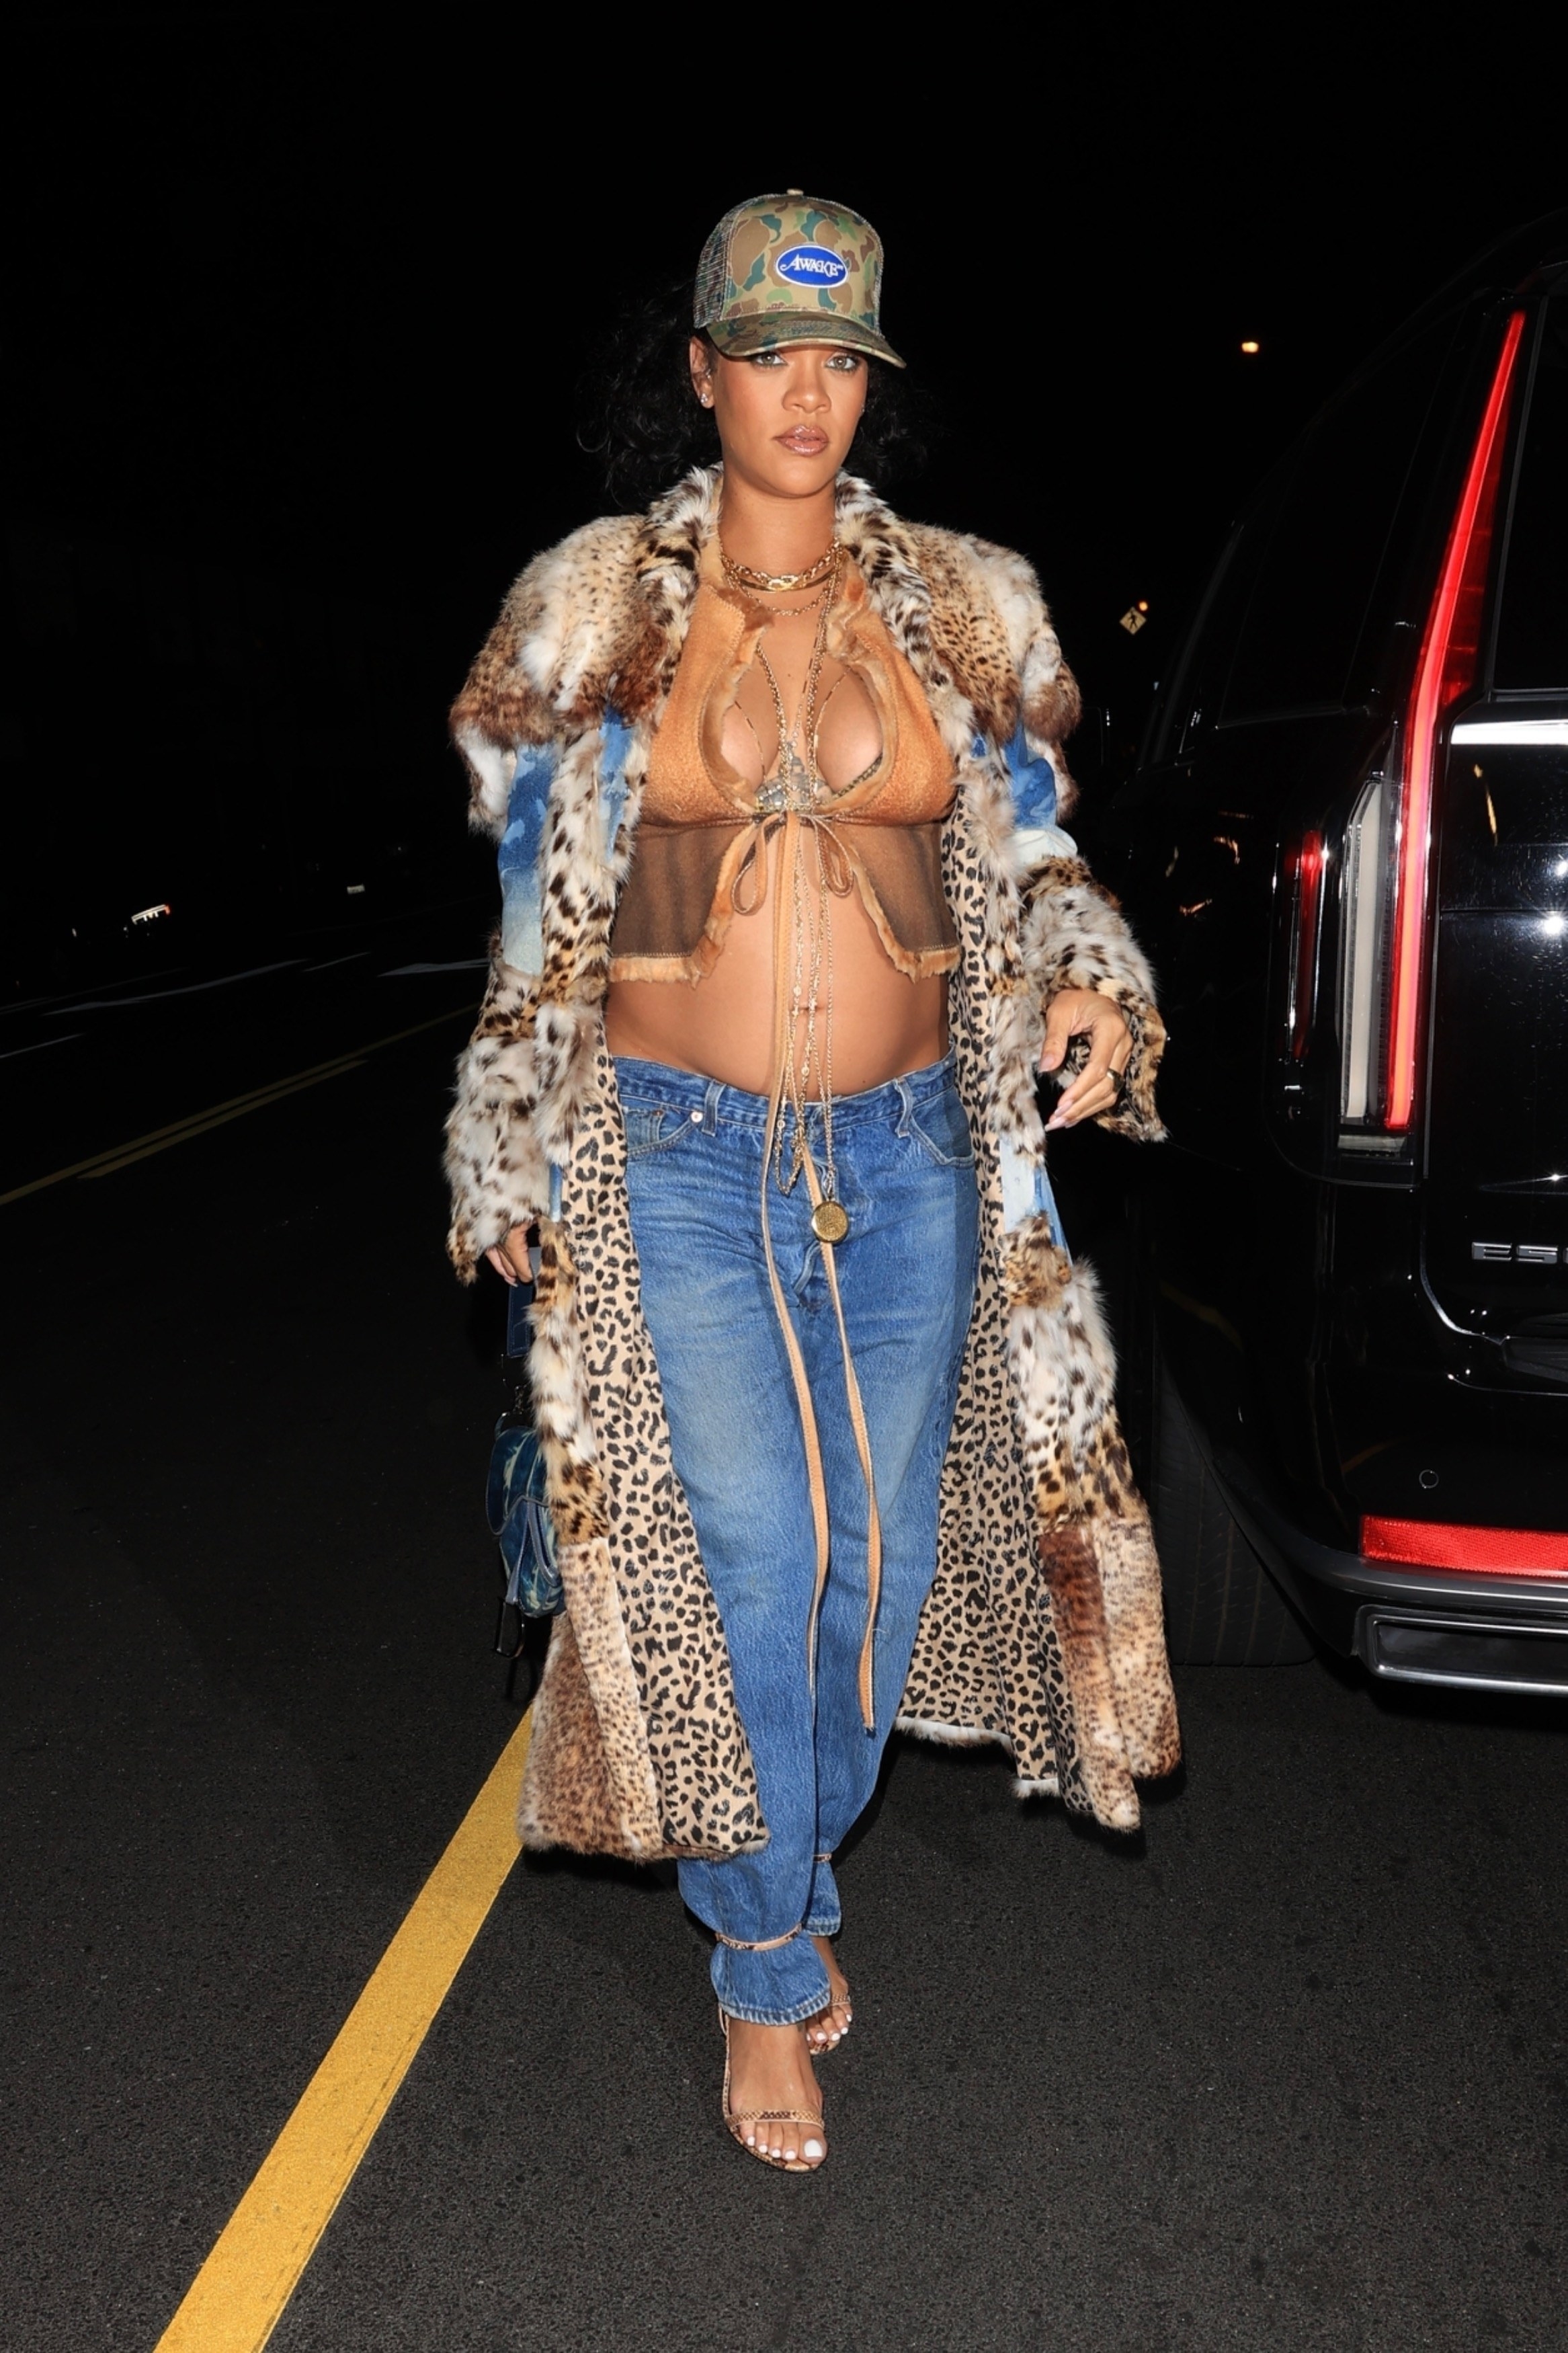 Rihanna spotted outside in jeans bikini top and fur coat